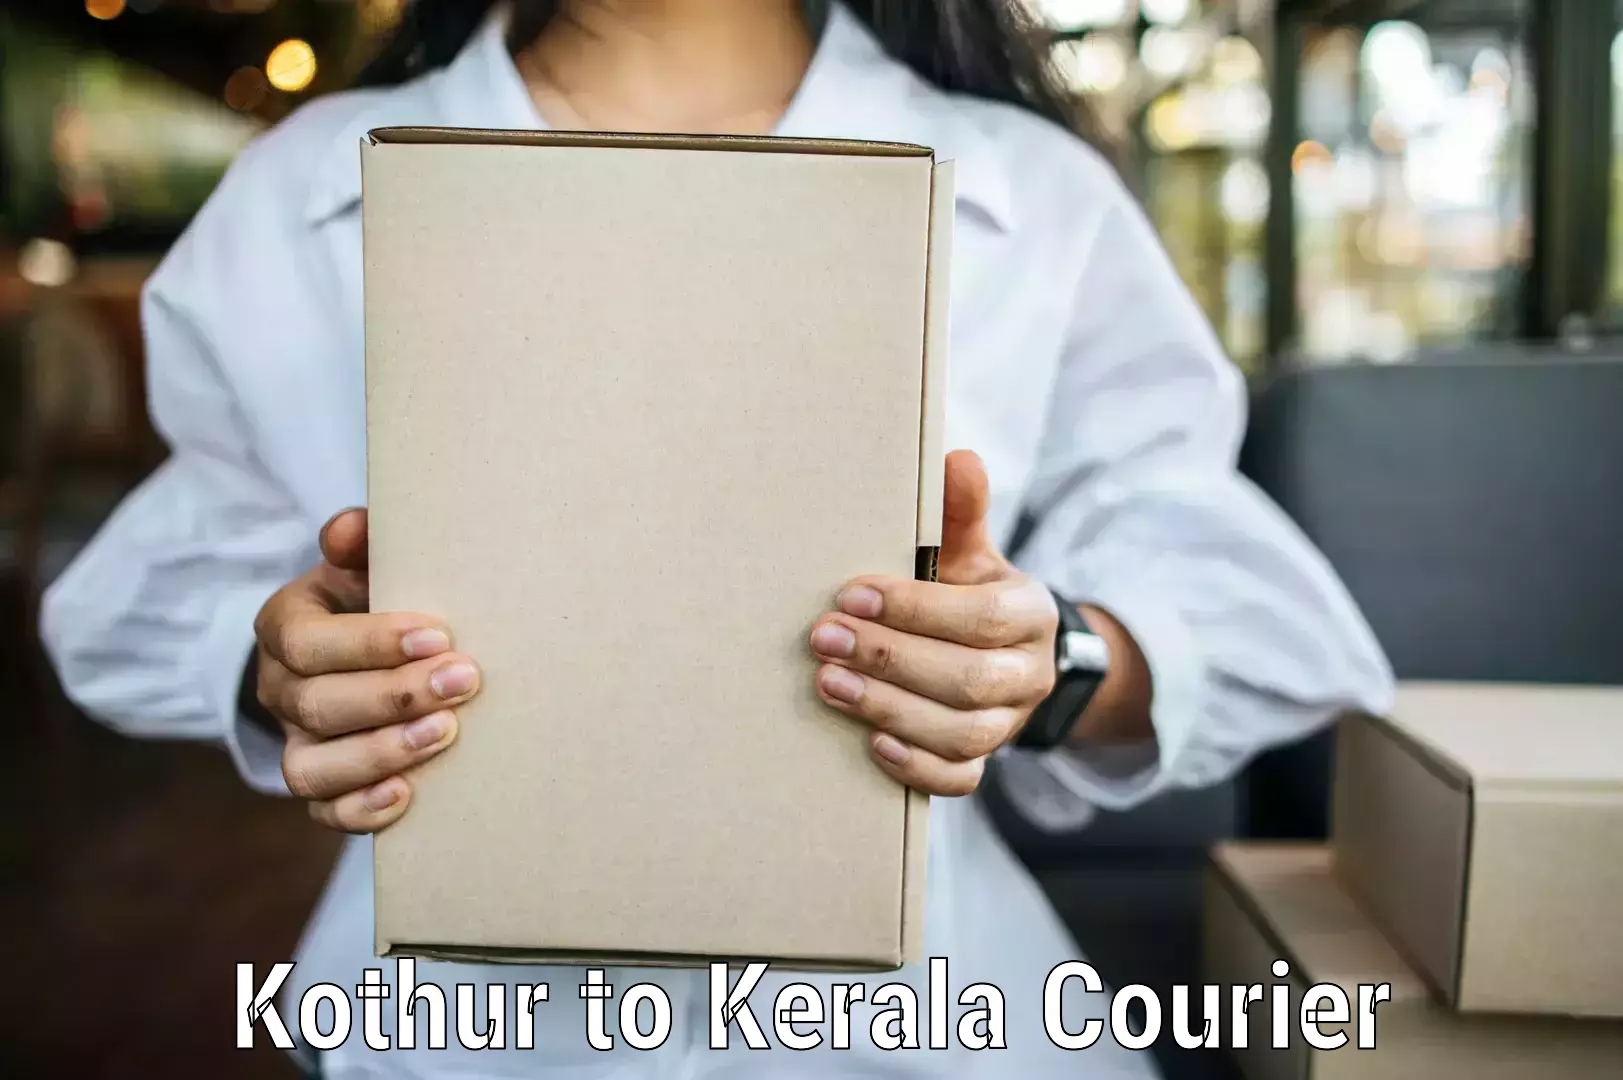 Personal courier services Kothur to Kerala